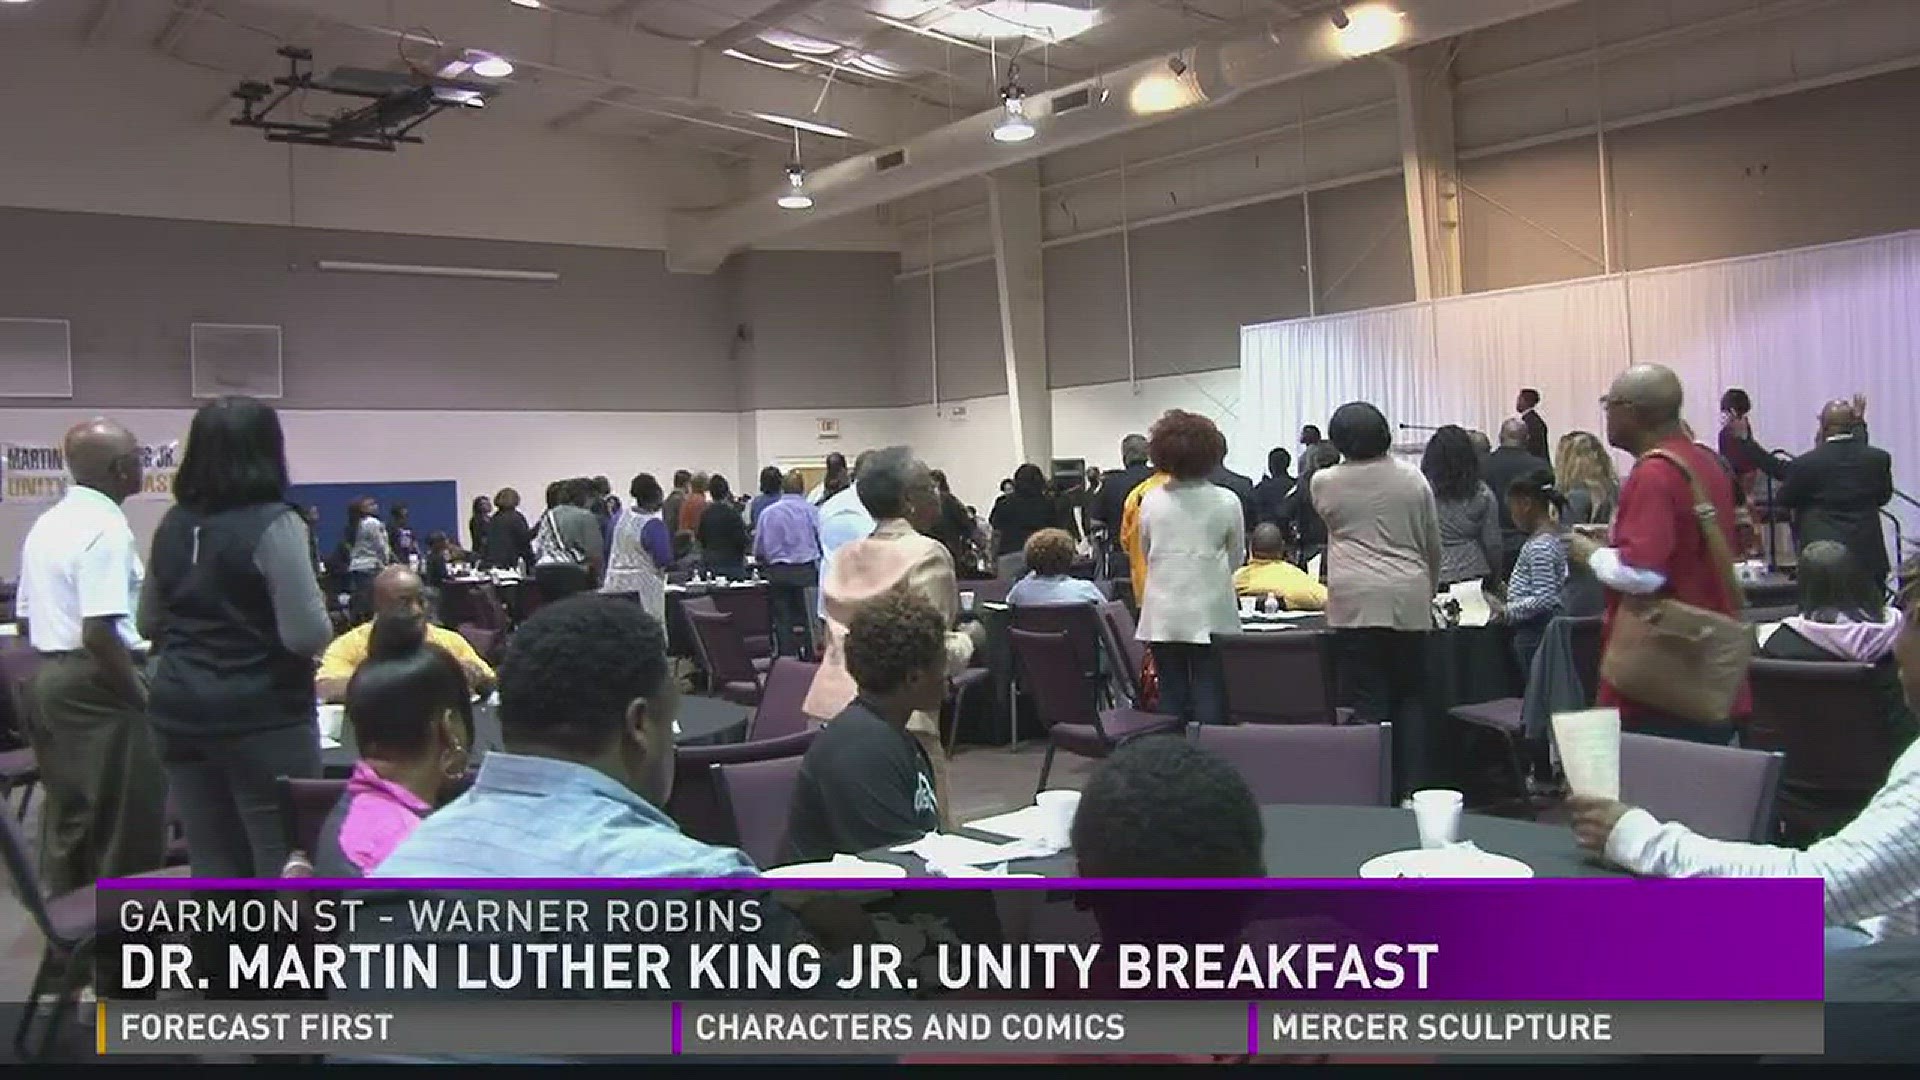 Dr. Martin Luther King Jr. unity breakfast